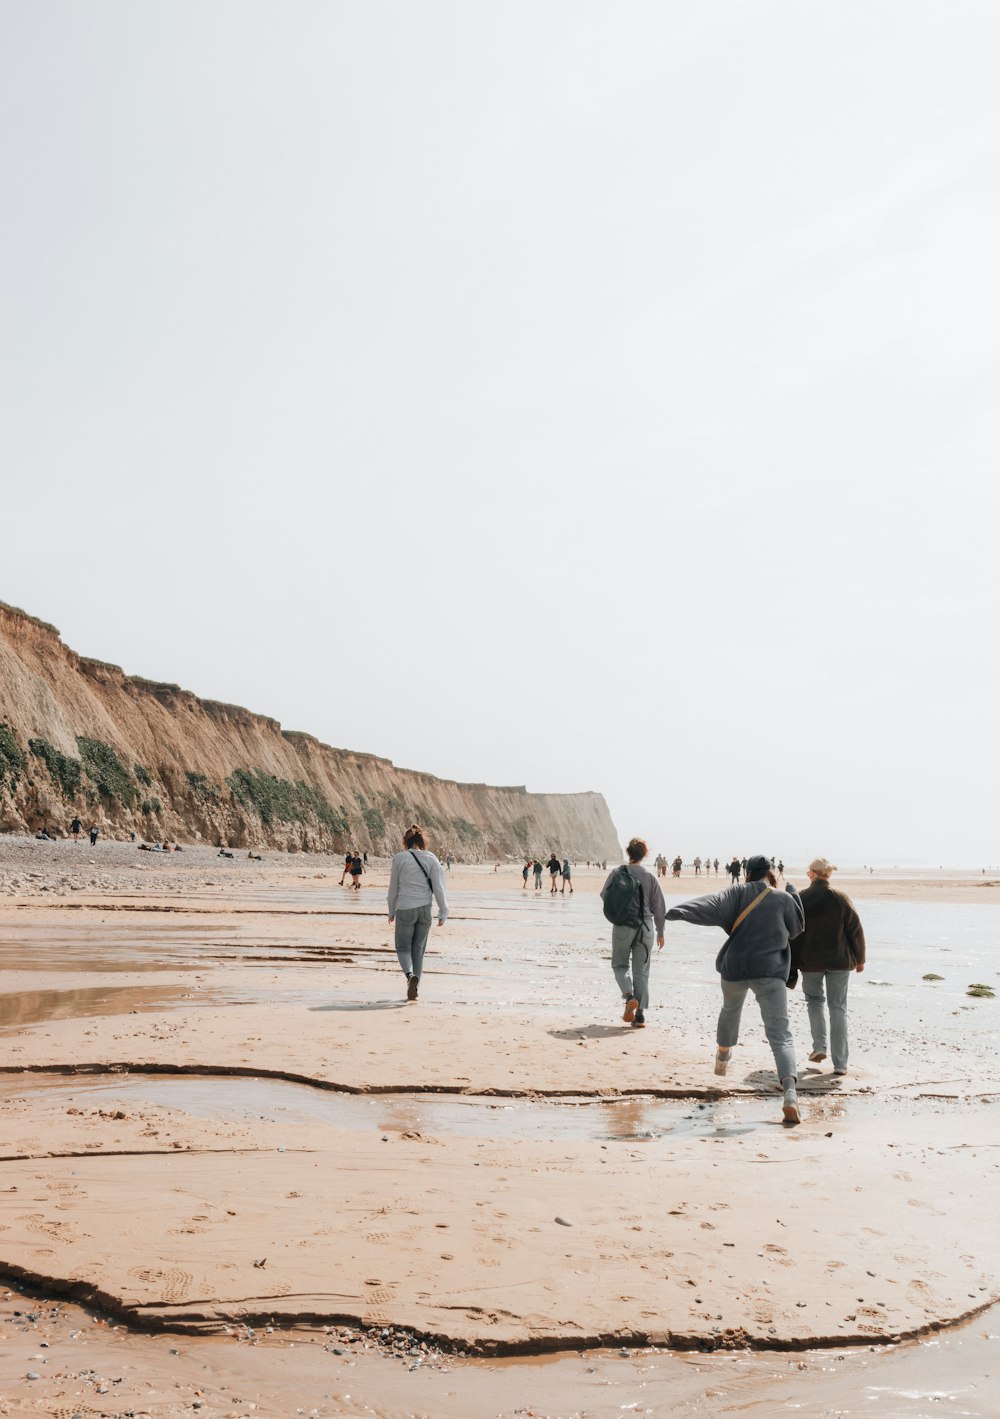 a group of people walking along a sandy beach